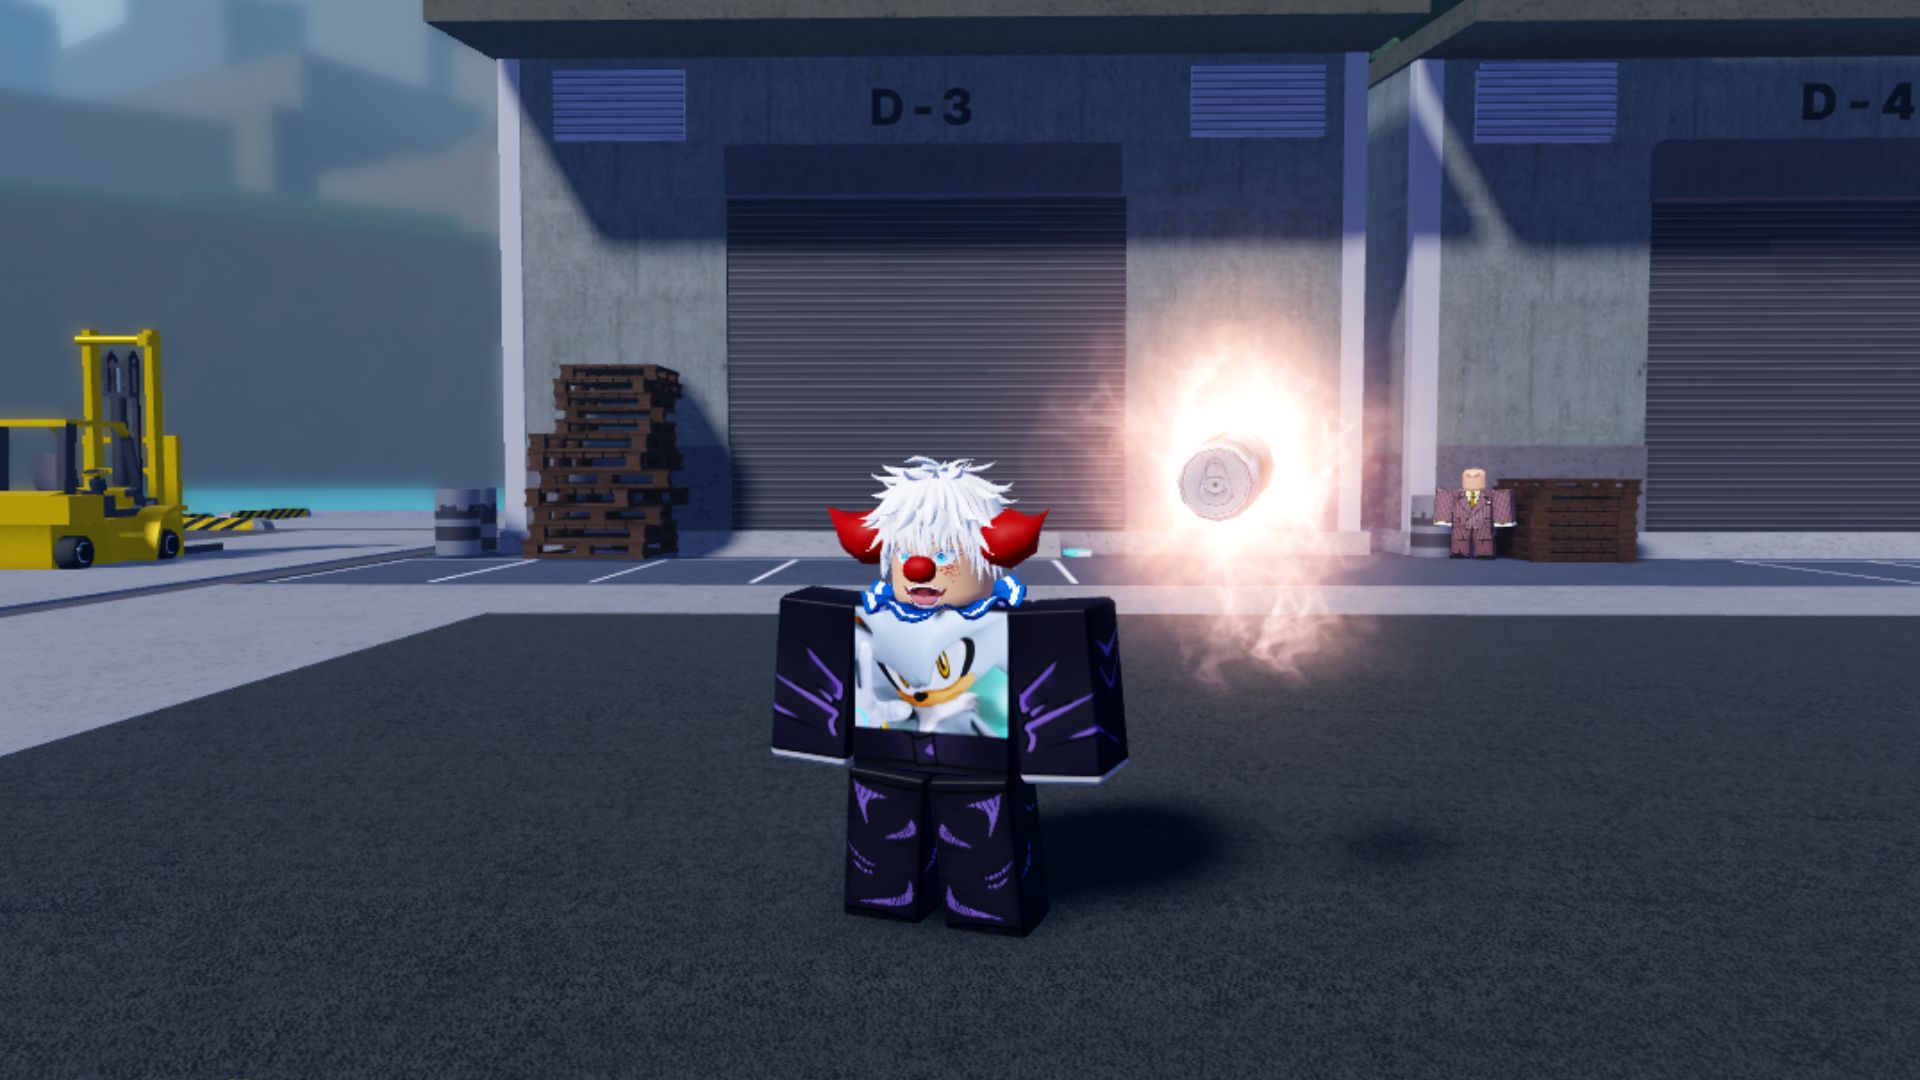 Roblox: Ro Ghoul Codes